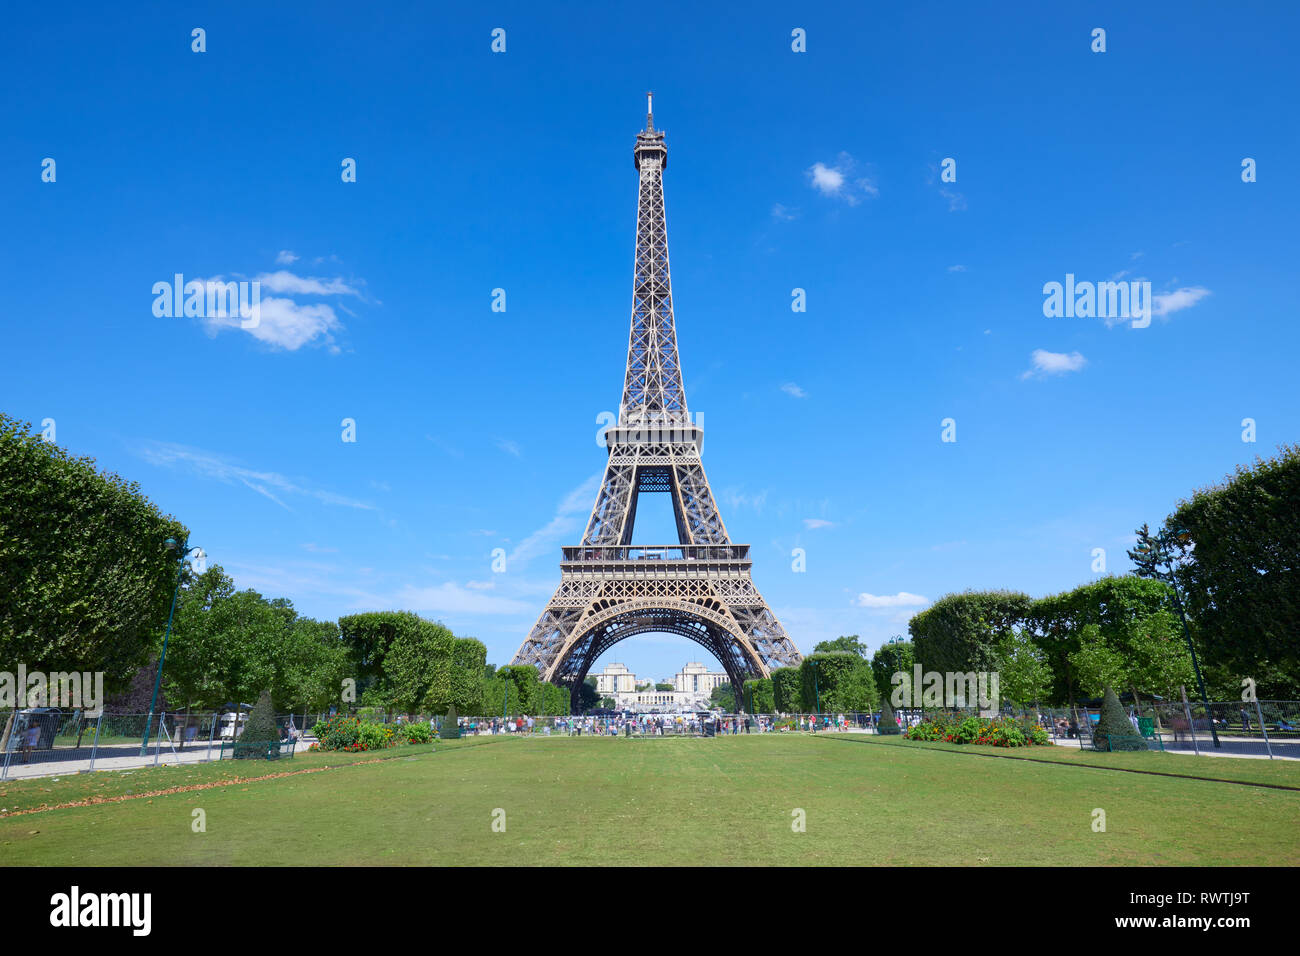 Eiffel Tower in Paris and empty green field of Mars meadow in a sunny summer day, clear blue sky Stock Photo